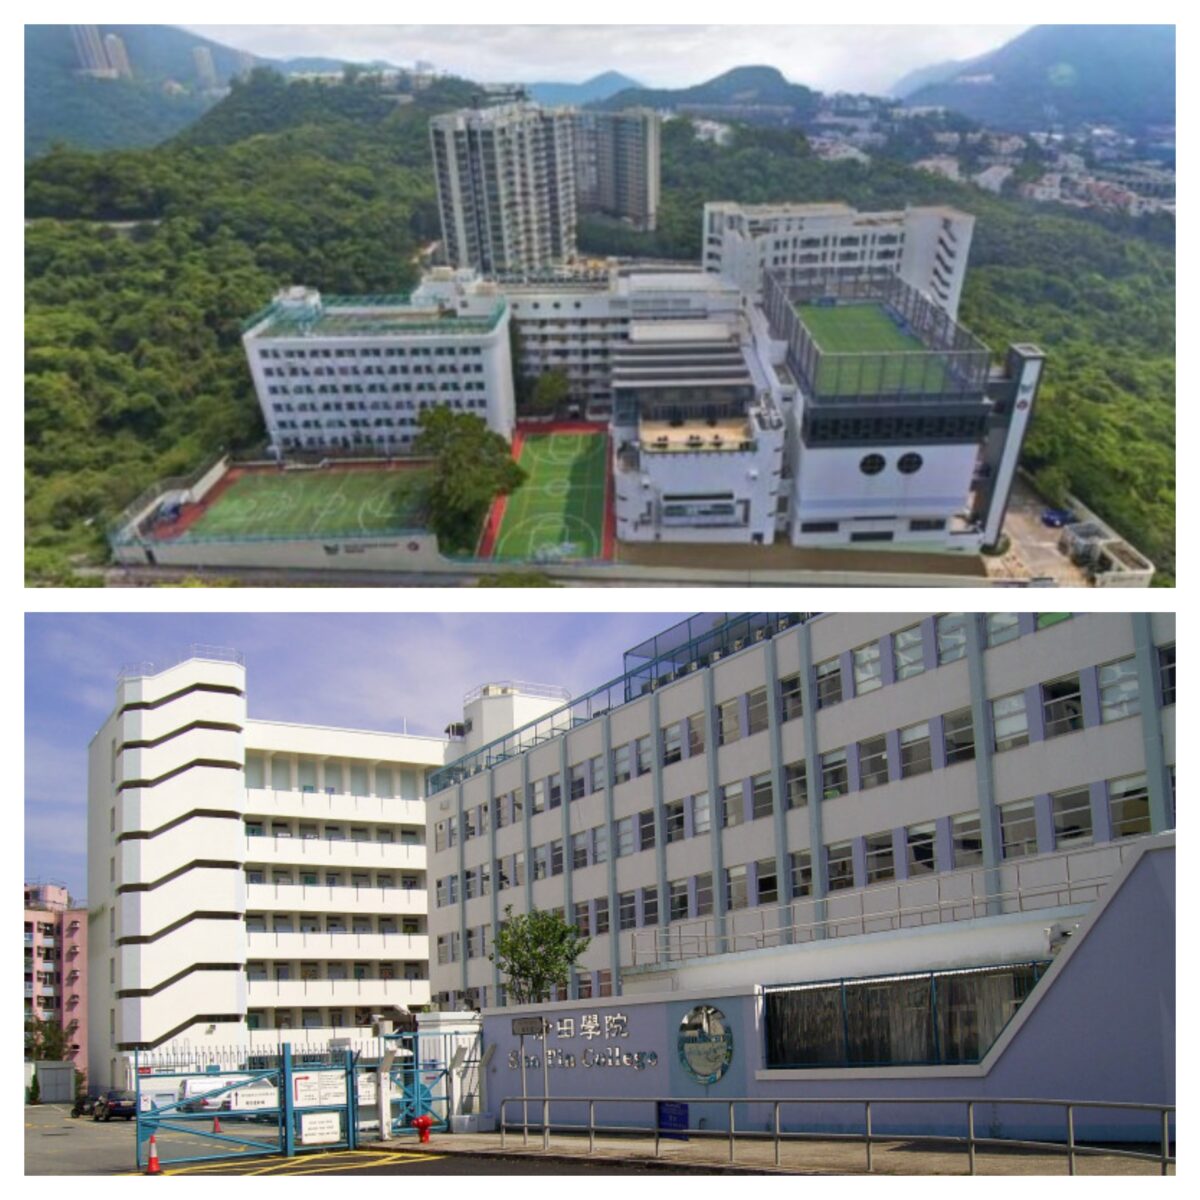 South Islands School and Shatin College